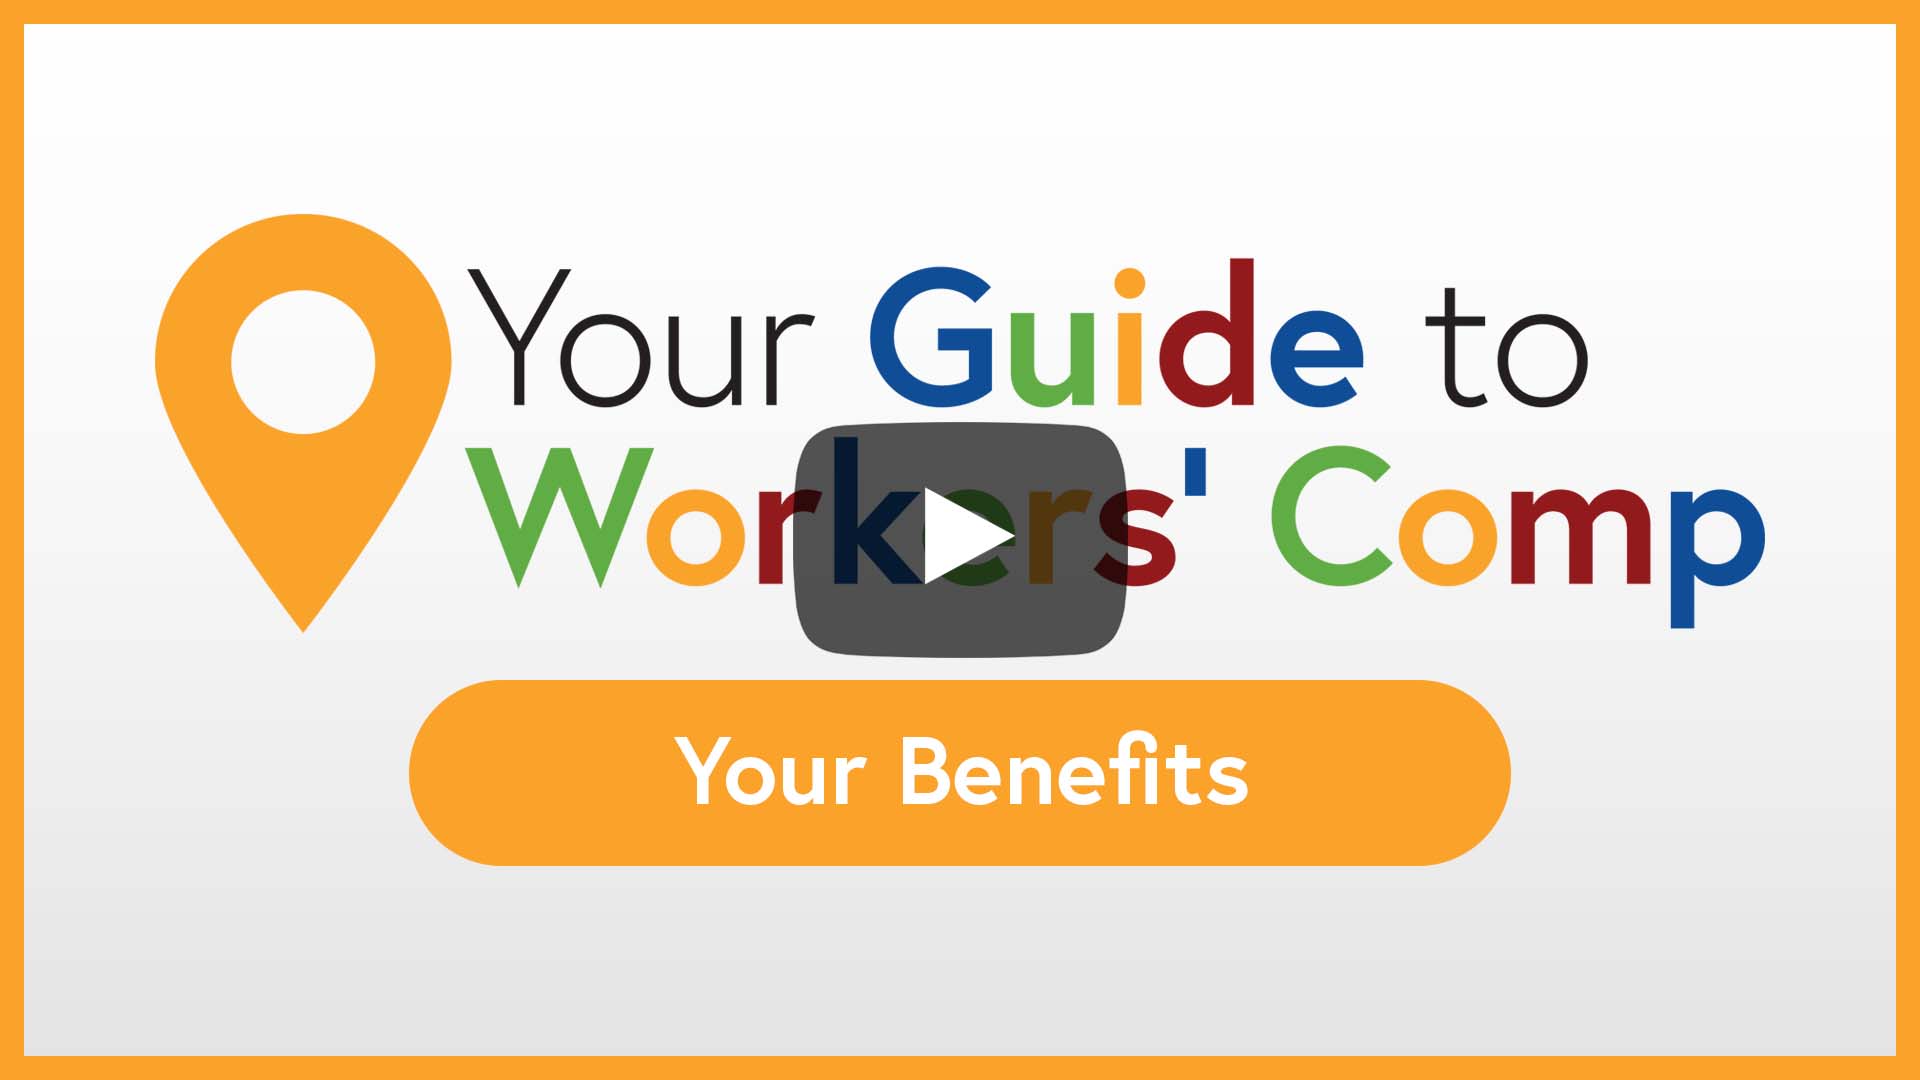 Your Guide to Workers' Comp - Your Benefits